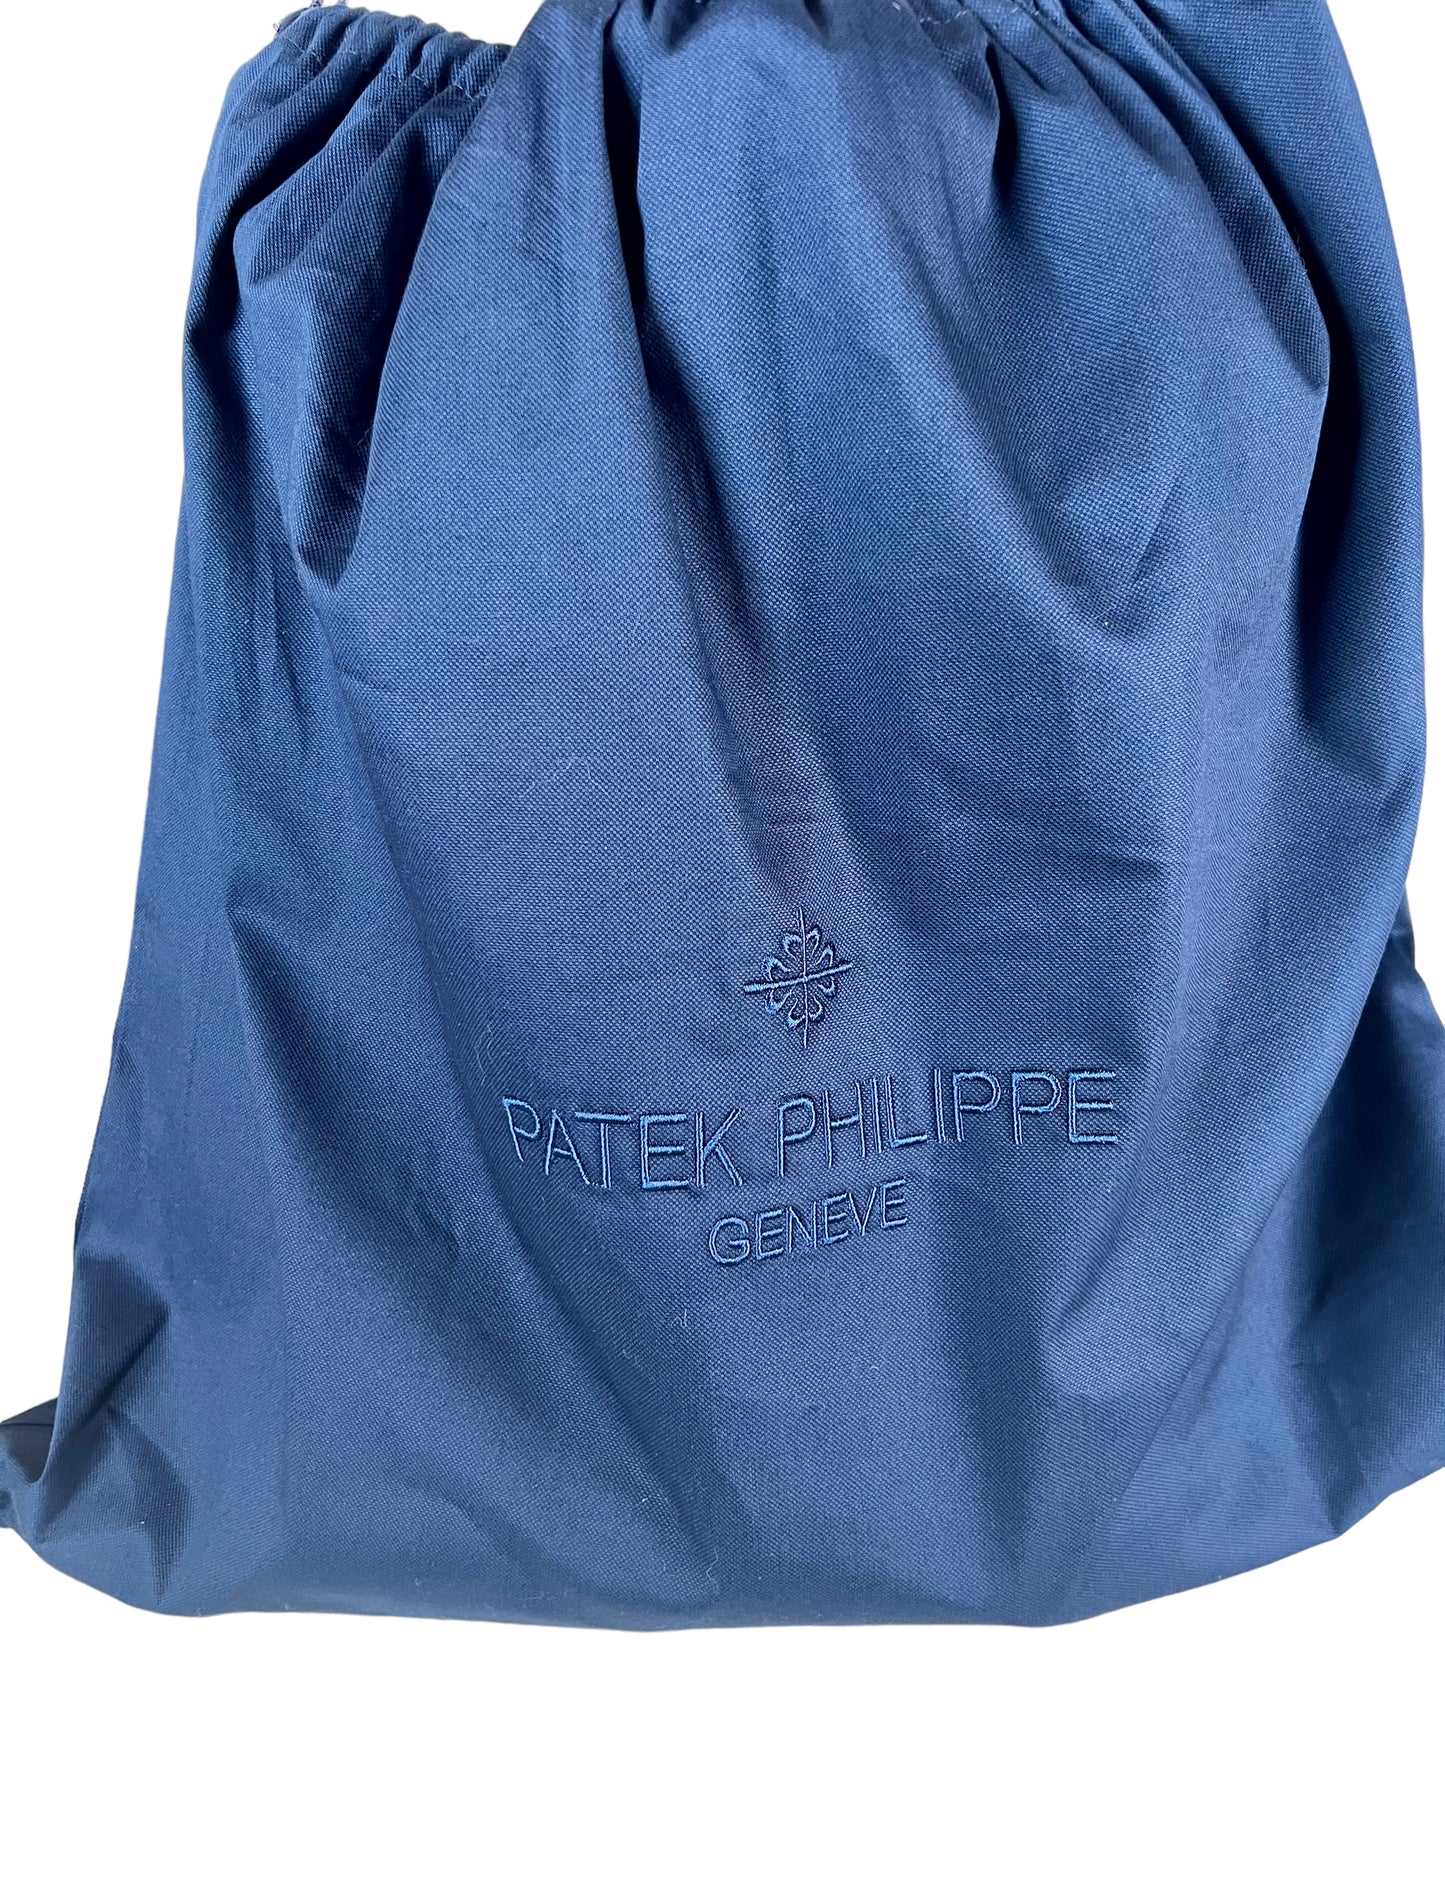 Patek Philippe New Travel/ Sports Bag/Sac/ Tasche Rare Collector with its Patek cushion